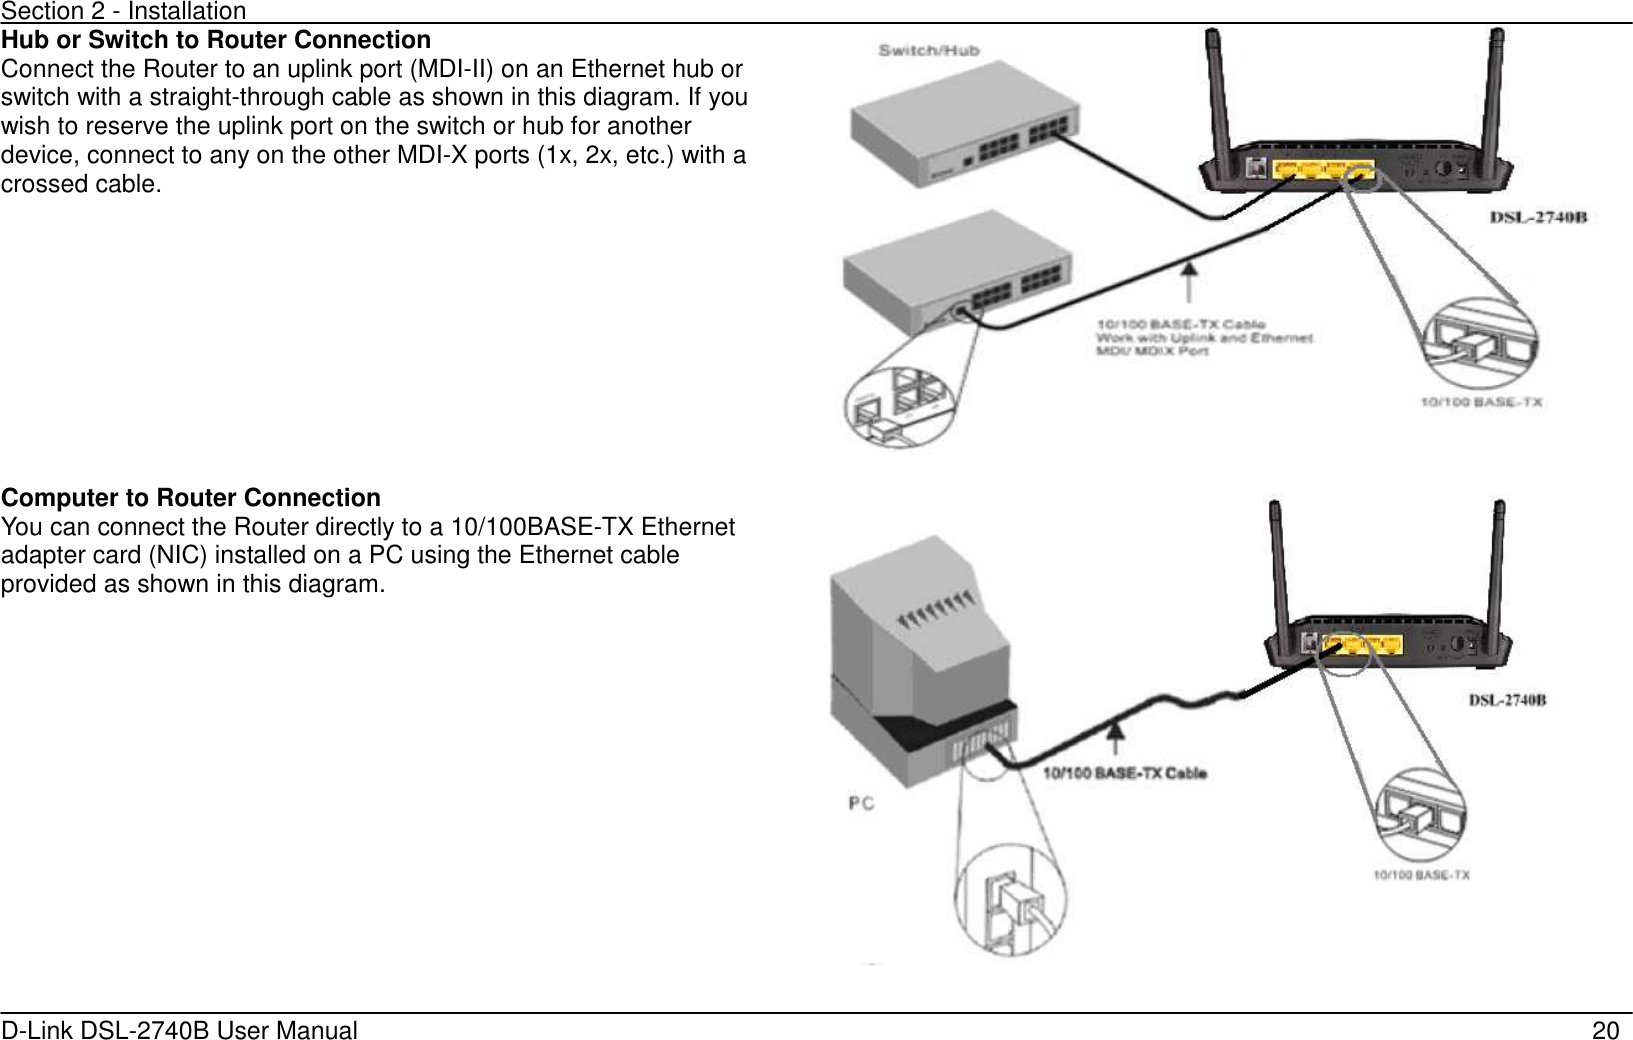 Section 2 - Installation   D-Link DSL-2740B User Manual                                                  20 Hub or Switch to Router Connection Connect the Router to an uplink port (MDI-II) on an Ethernet hub or switch with a straight-through cable as shown in this diagram. If you wish to reserve the uplink port on the switch or hub for another device, connect to any on the other MDI-X ports (1x, 2x, etc.) with a crossed cable.   Computer to Router Connection You can connect the Router directly to a 10/100BASE-TX Ethernet adapter card (NIC) installed on a PC using the Ethernet cable provided as shown in this diagram.       